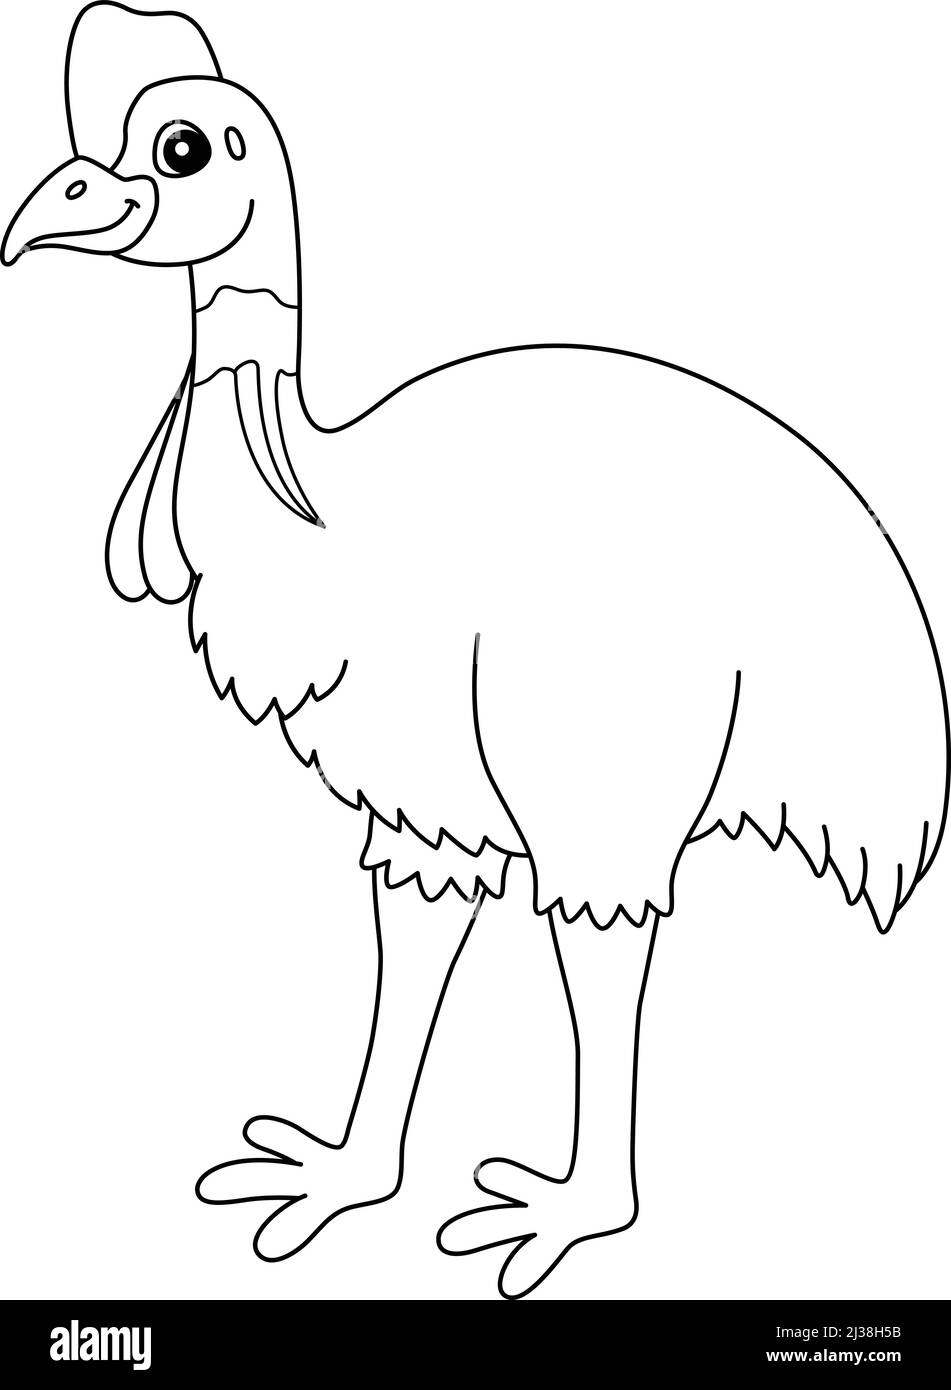 Cassowary Bird Animal Coloring Page Isolated Stock Vector